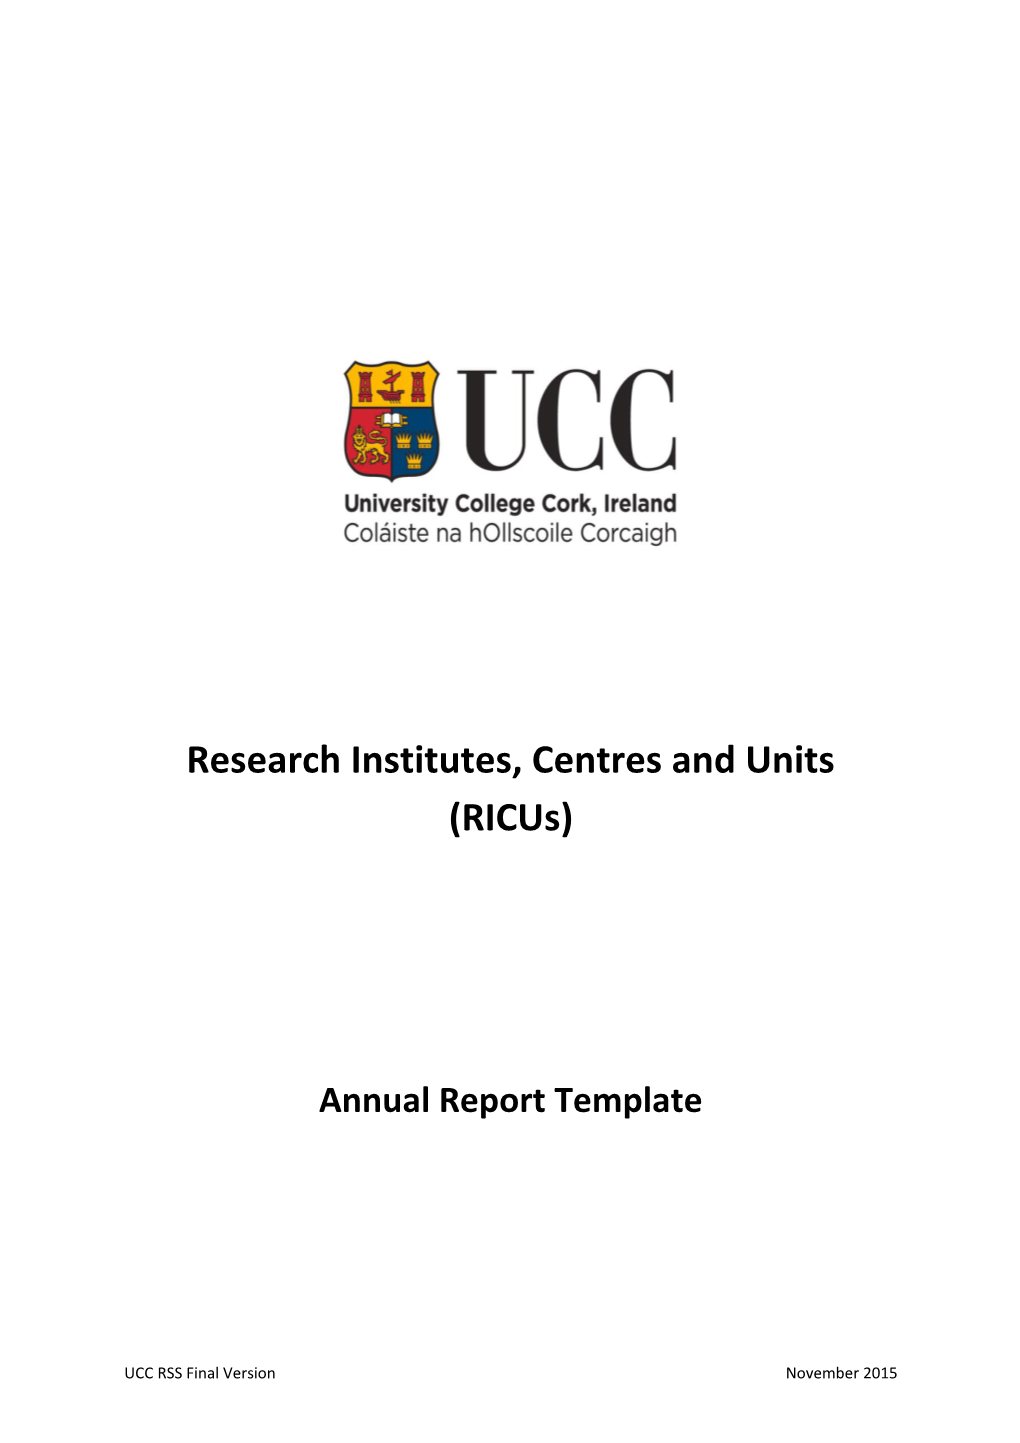 Research Institutes, Centres and Units (Ricus)